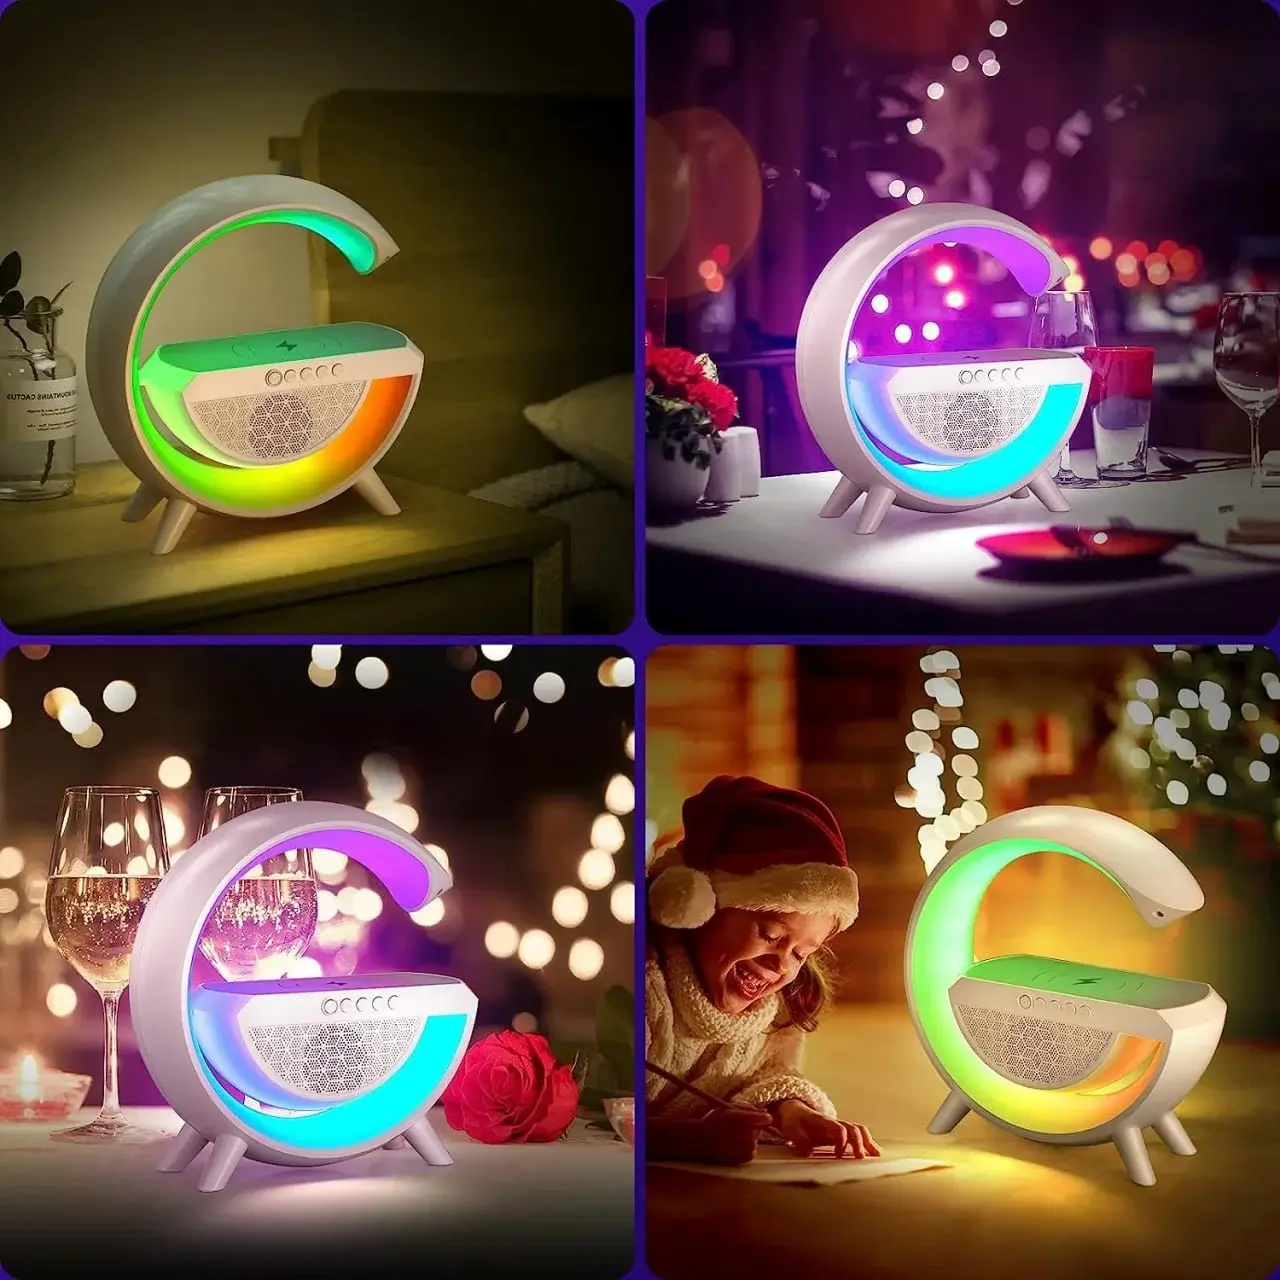 3 In 1 G Lamp Speaker G Stand Charger Multicolor Led Night Lamp Wireless Charger Mobiles Night Lamp - MaalGaari.Shop